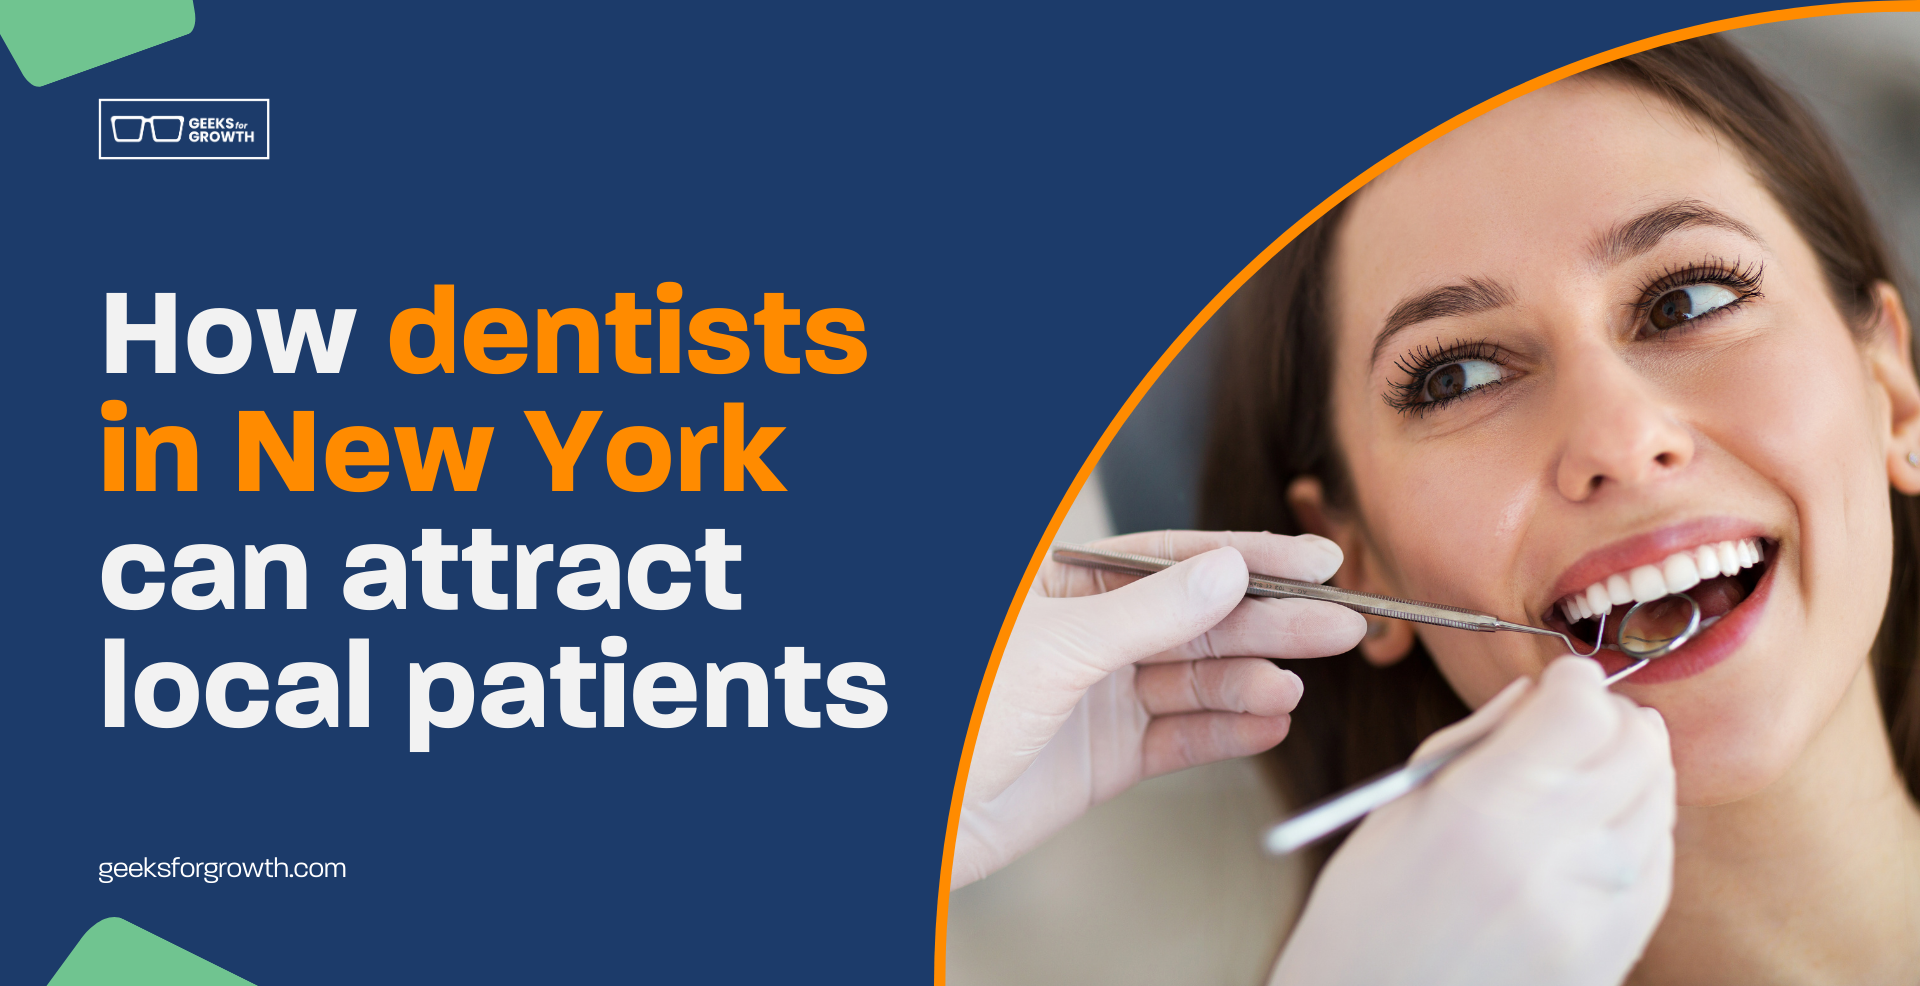 How dentists in New York can attract local patients